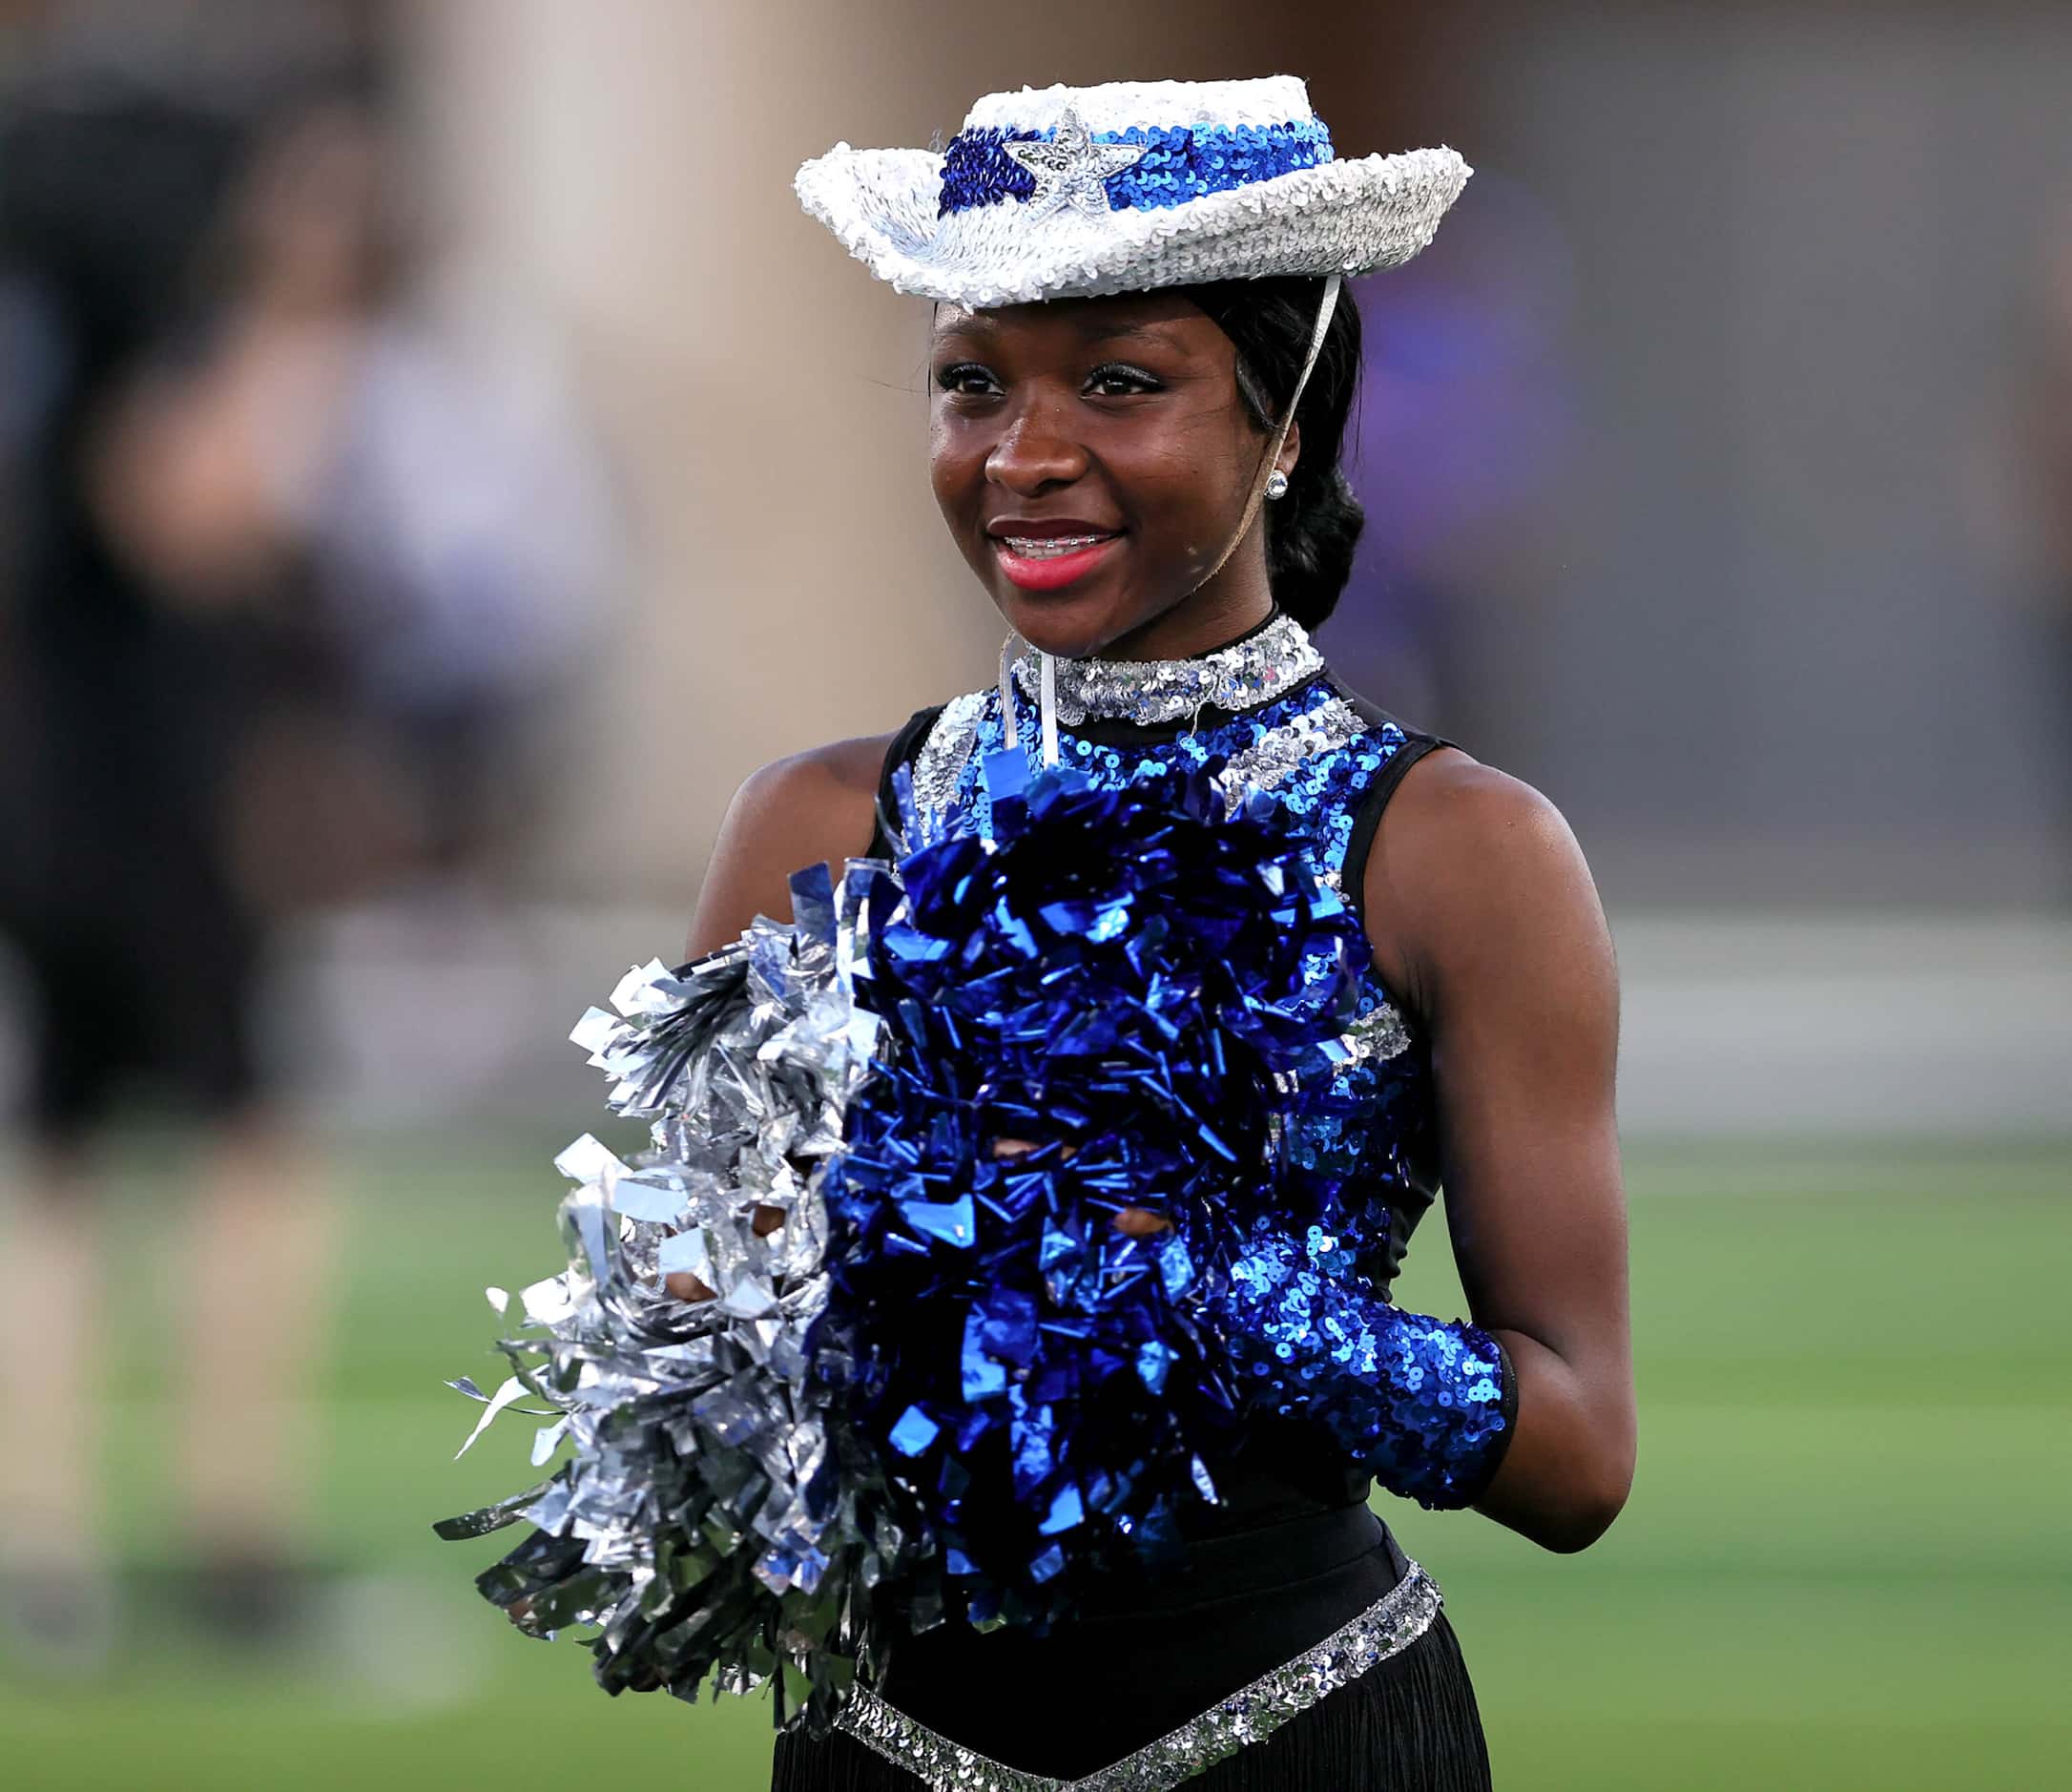 The North Crowley Panthers face Euless Trinity Trojans in a high school football game on...